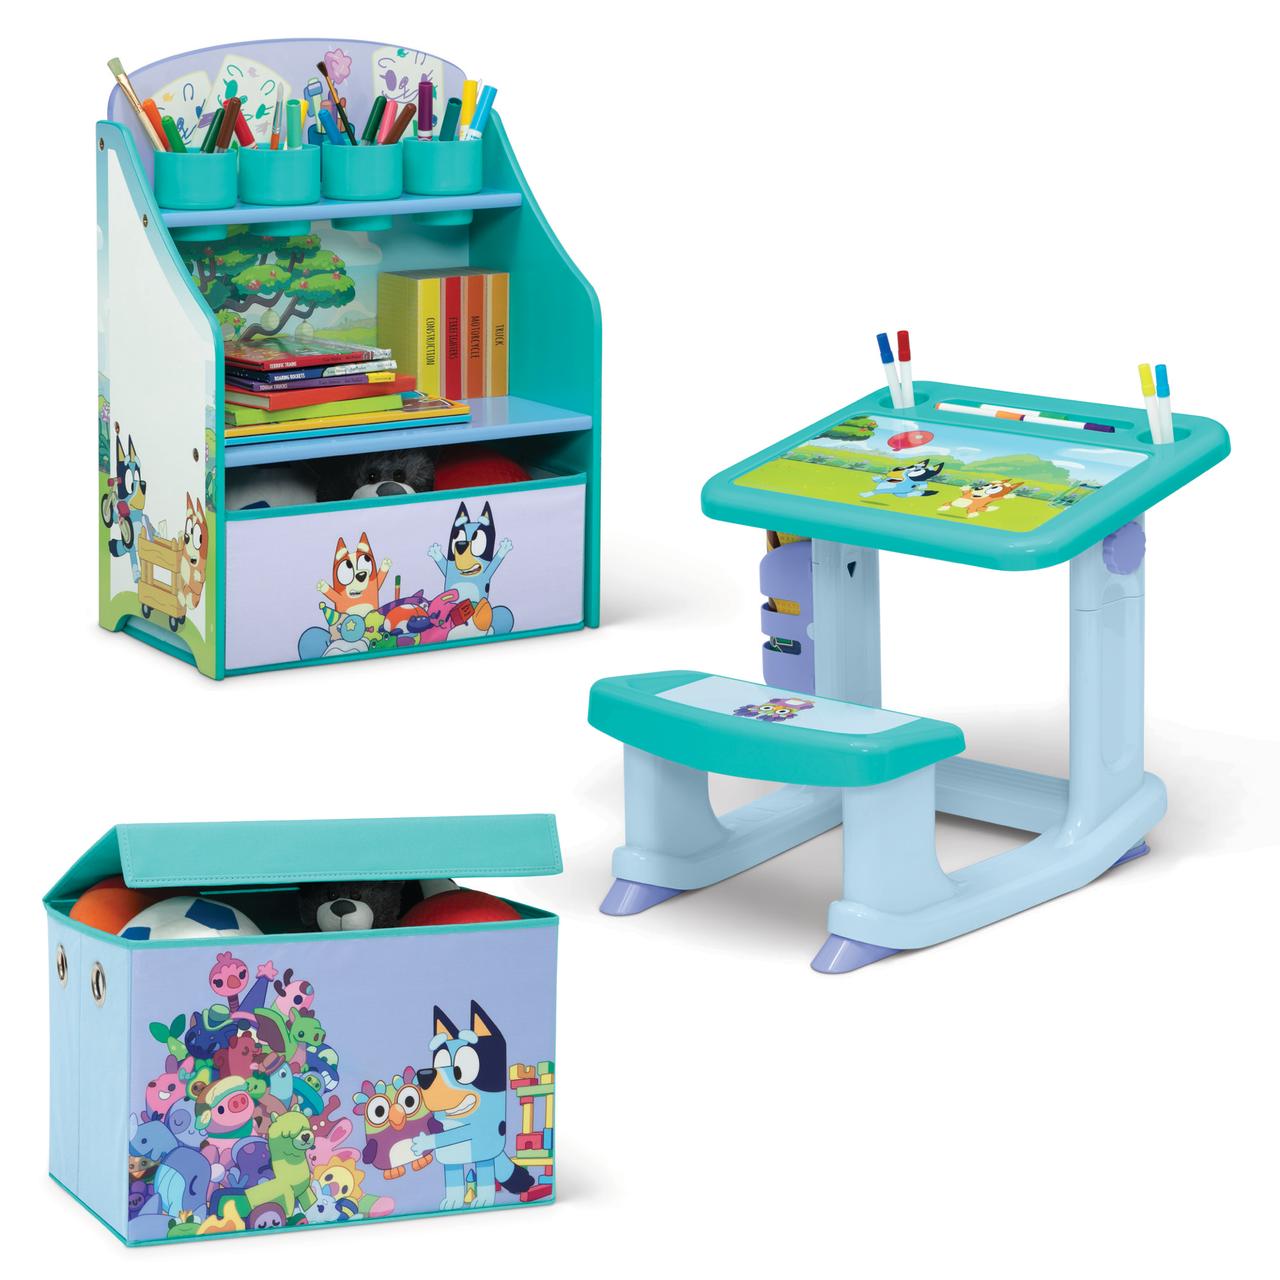 Bluey 3-Piece Art & Play Toddler Room-in-a-Box by Delta Children – Includes Draw & Play Desk, Art & Storage Station & Fabric Toy Box, Blue - image 1 of 11